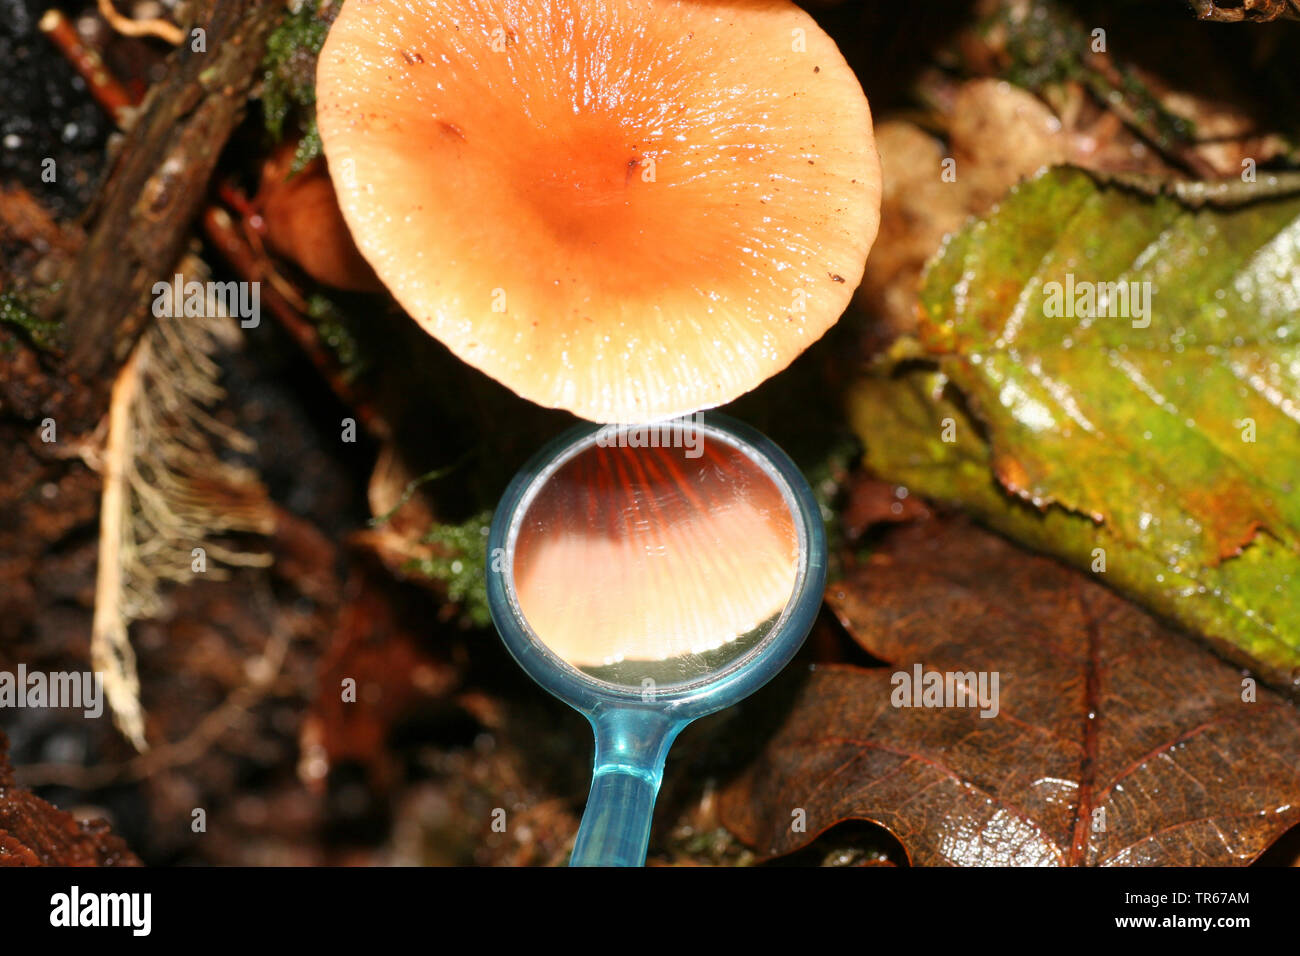 determination of a mushroom with a mirror, Germany Stock Photo